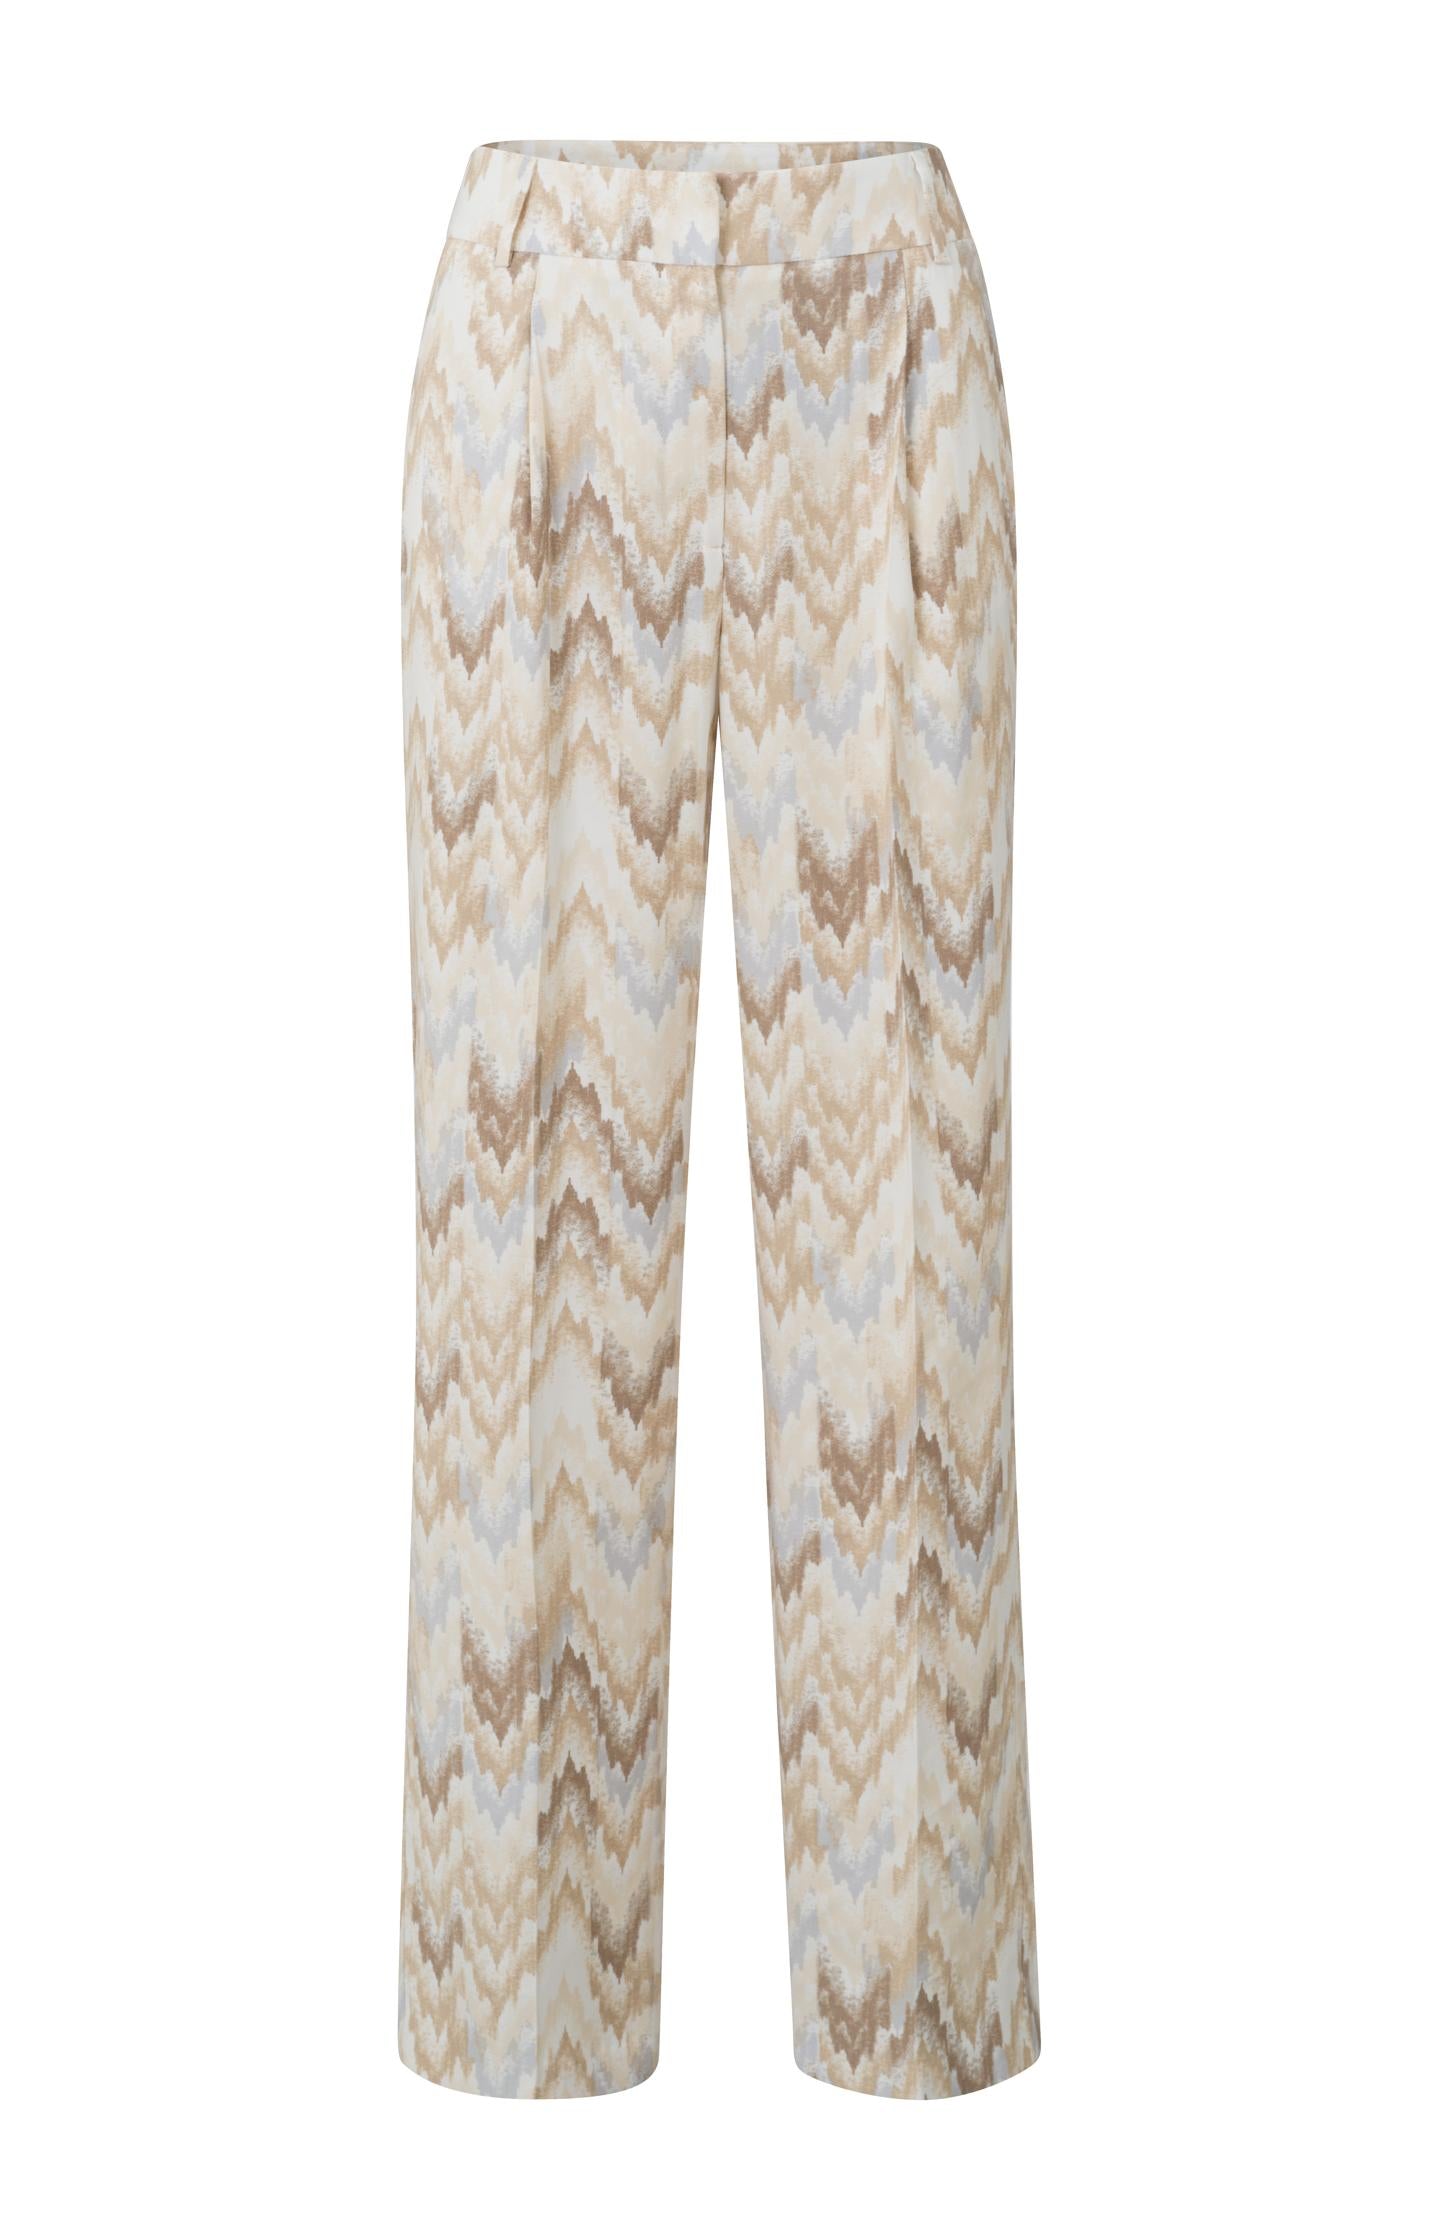 Yaya Pearl Blue Dessin Printed Trousers with Pockets Zip Fly and Pleat Detail